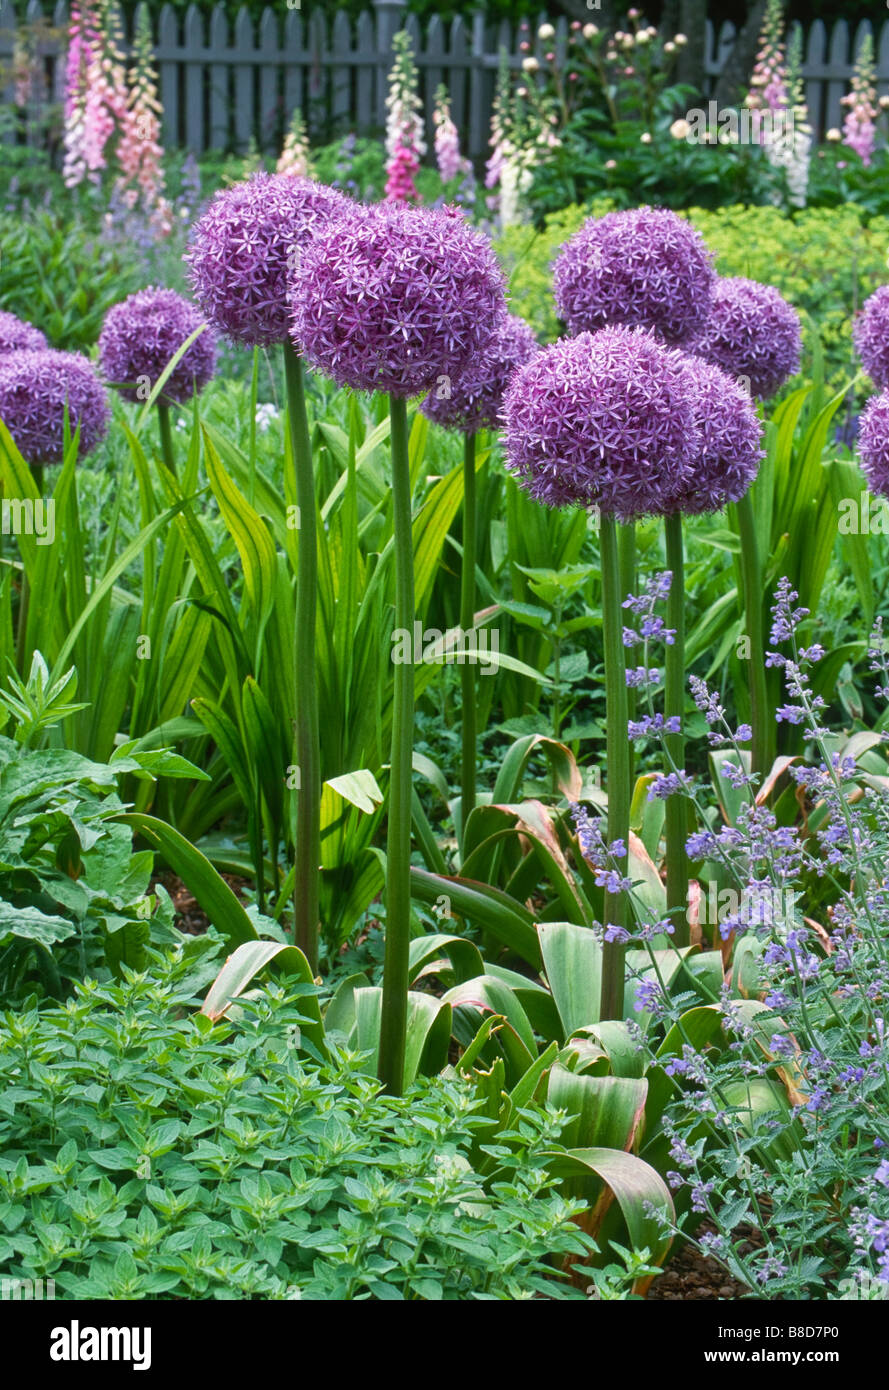 Early summer blue, pink, purple garden plant combination includes contrasting flower textures and shapes. Stock Photo